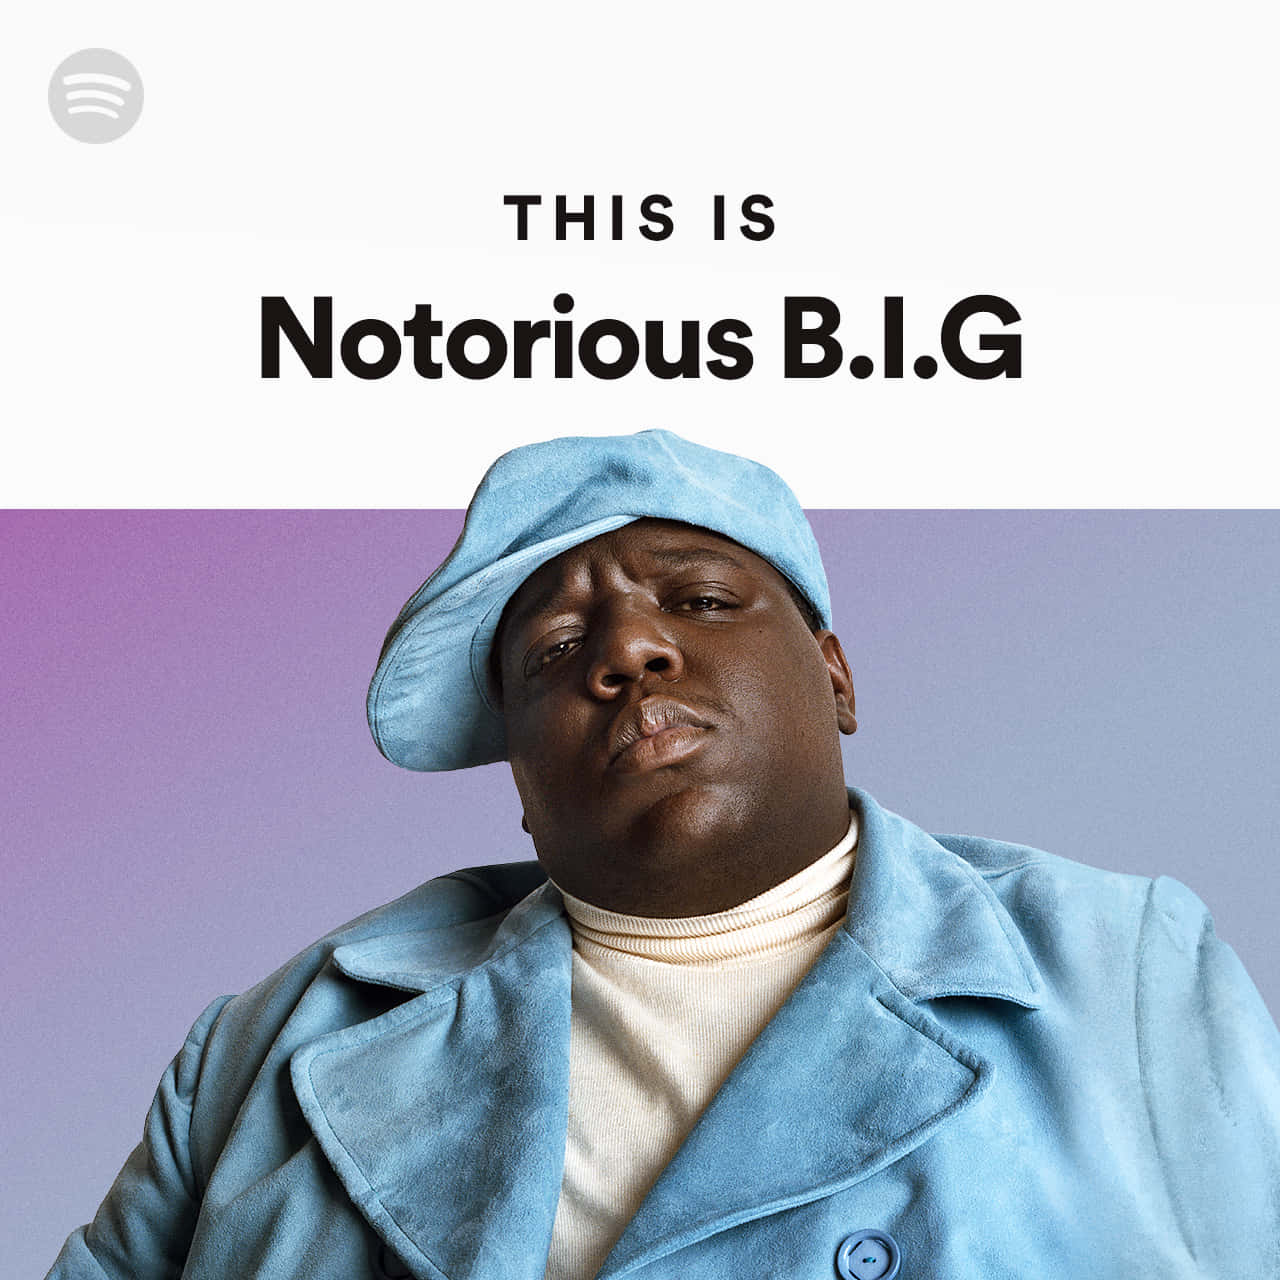 Download This Is The Notorious Big Cover Wallpaper 